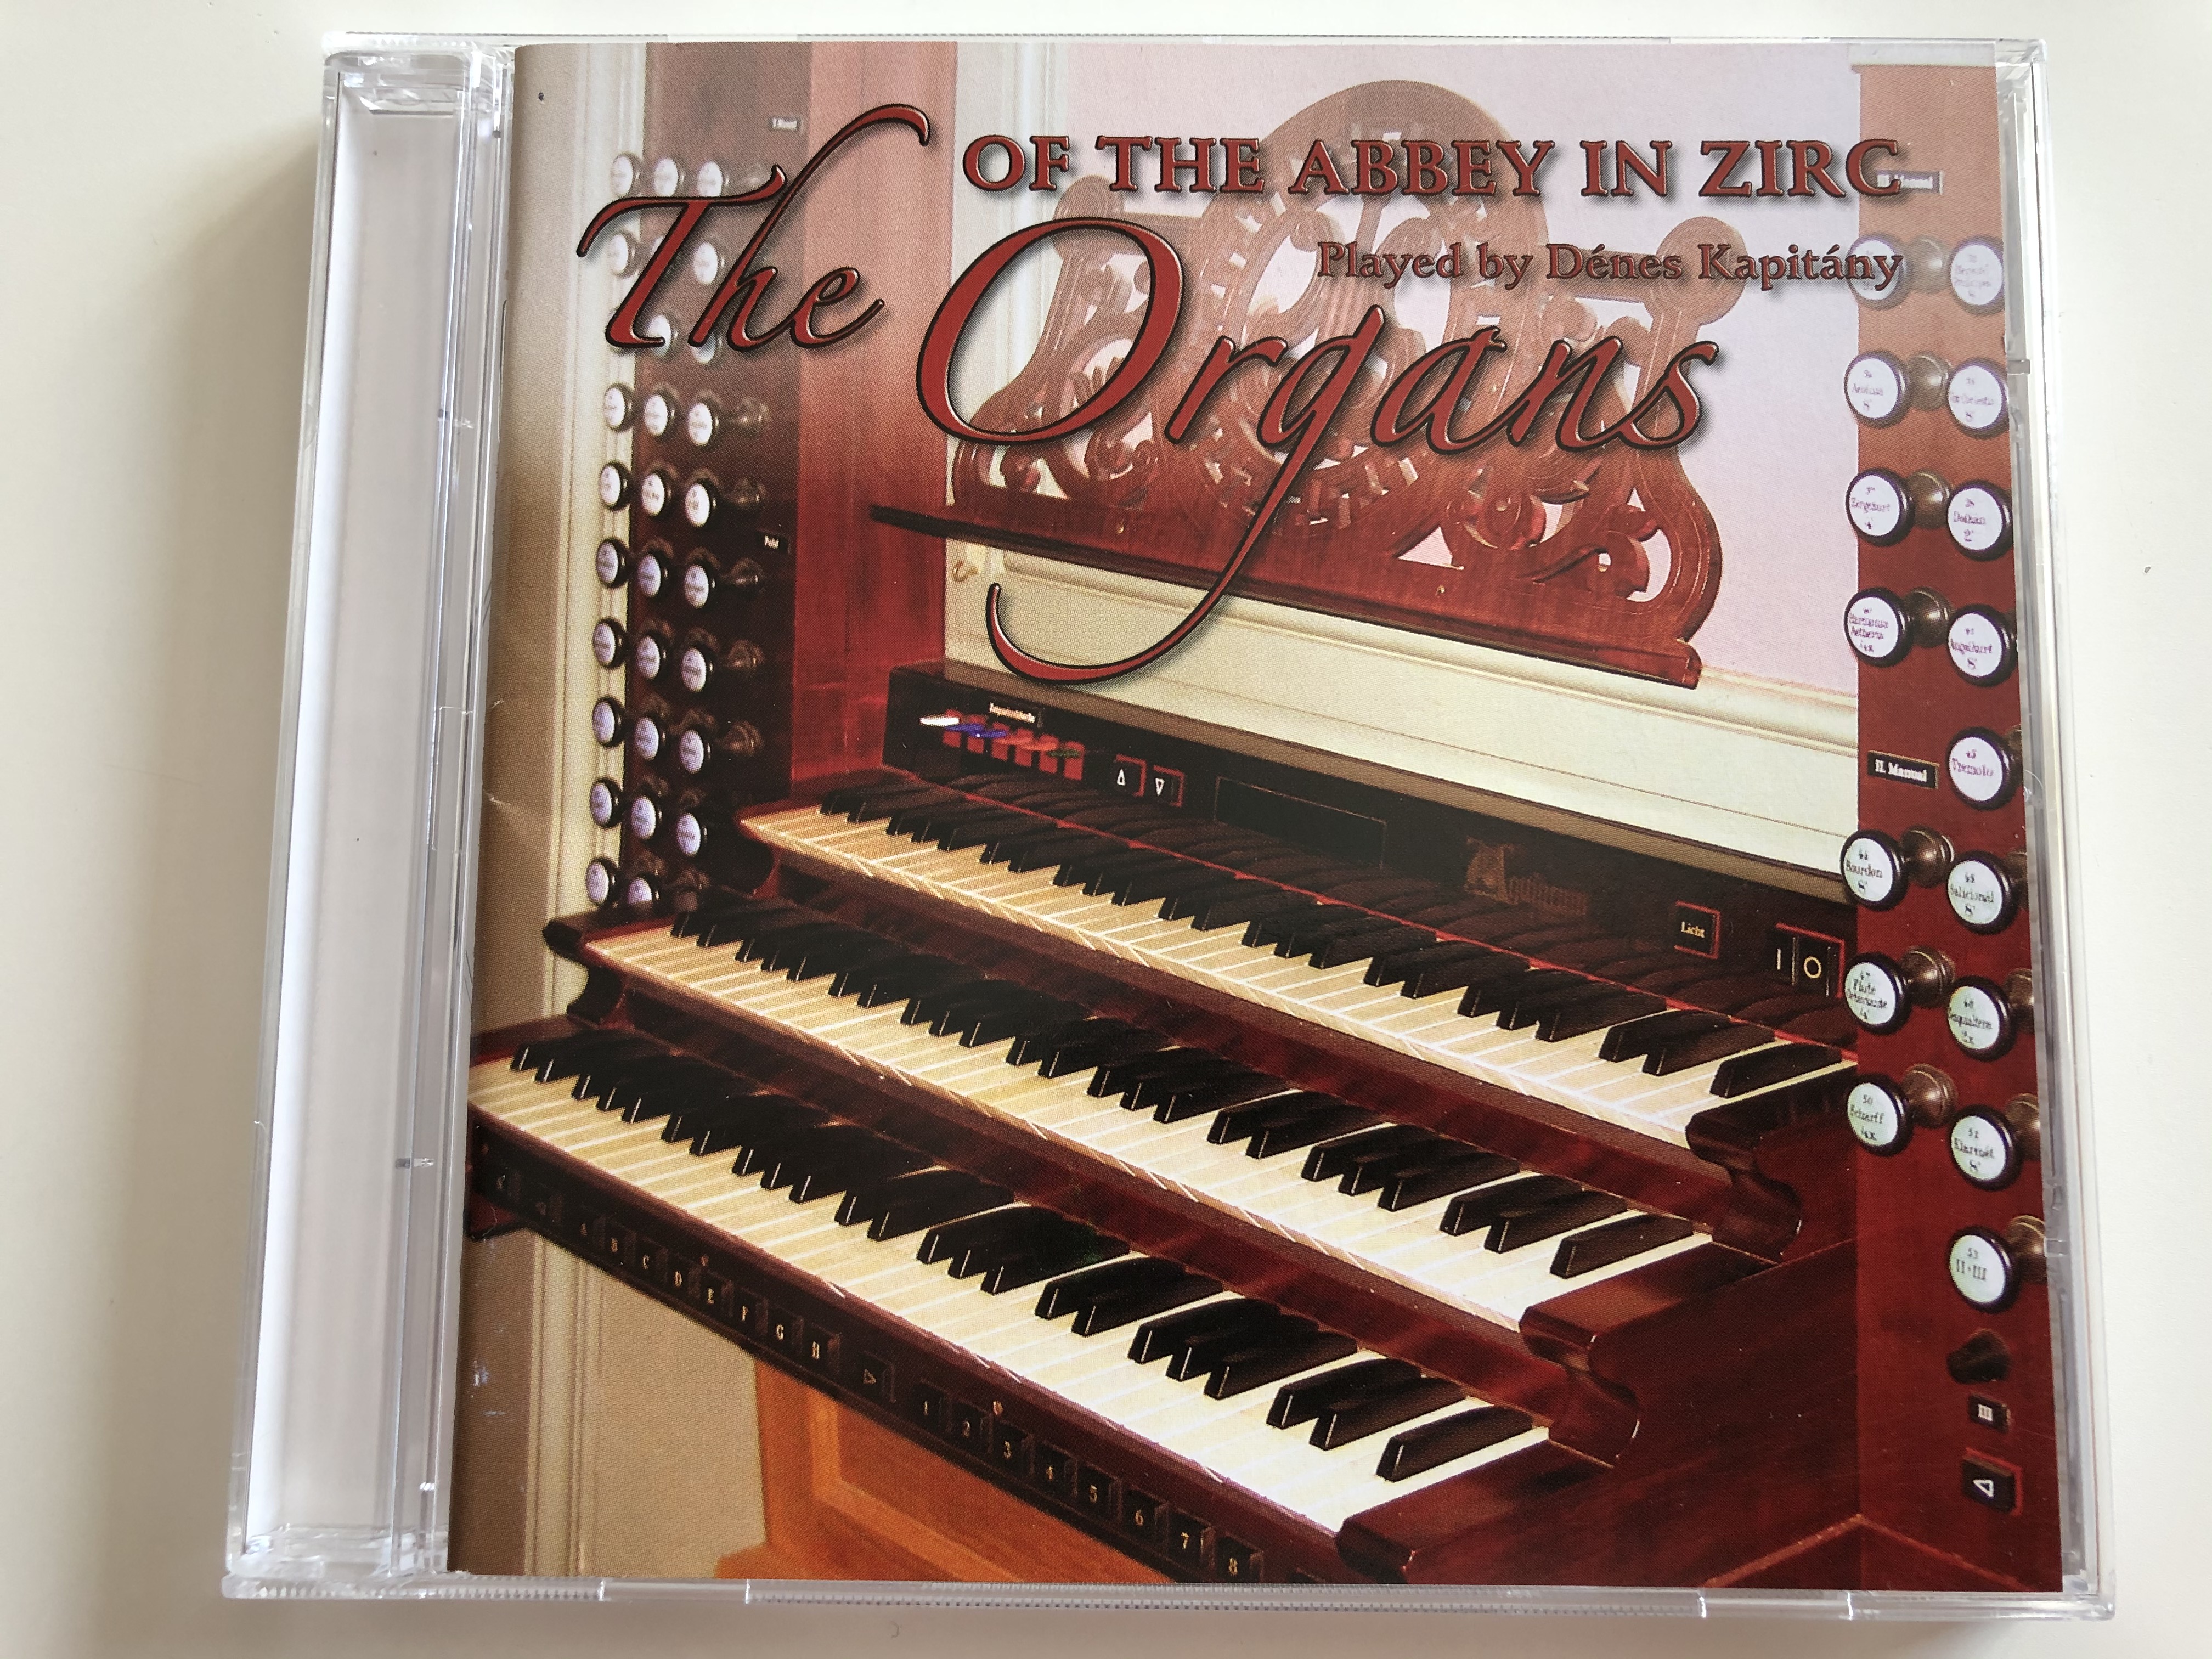 the-organs-of-the-abbey-in-zirc-playes-by-denes-kapitany-audio-cd-2006-2006org-1-.jpg